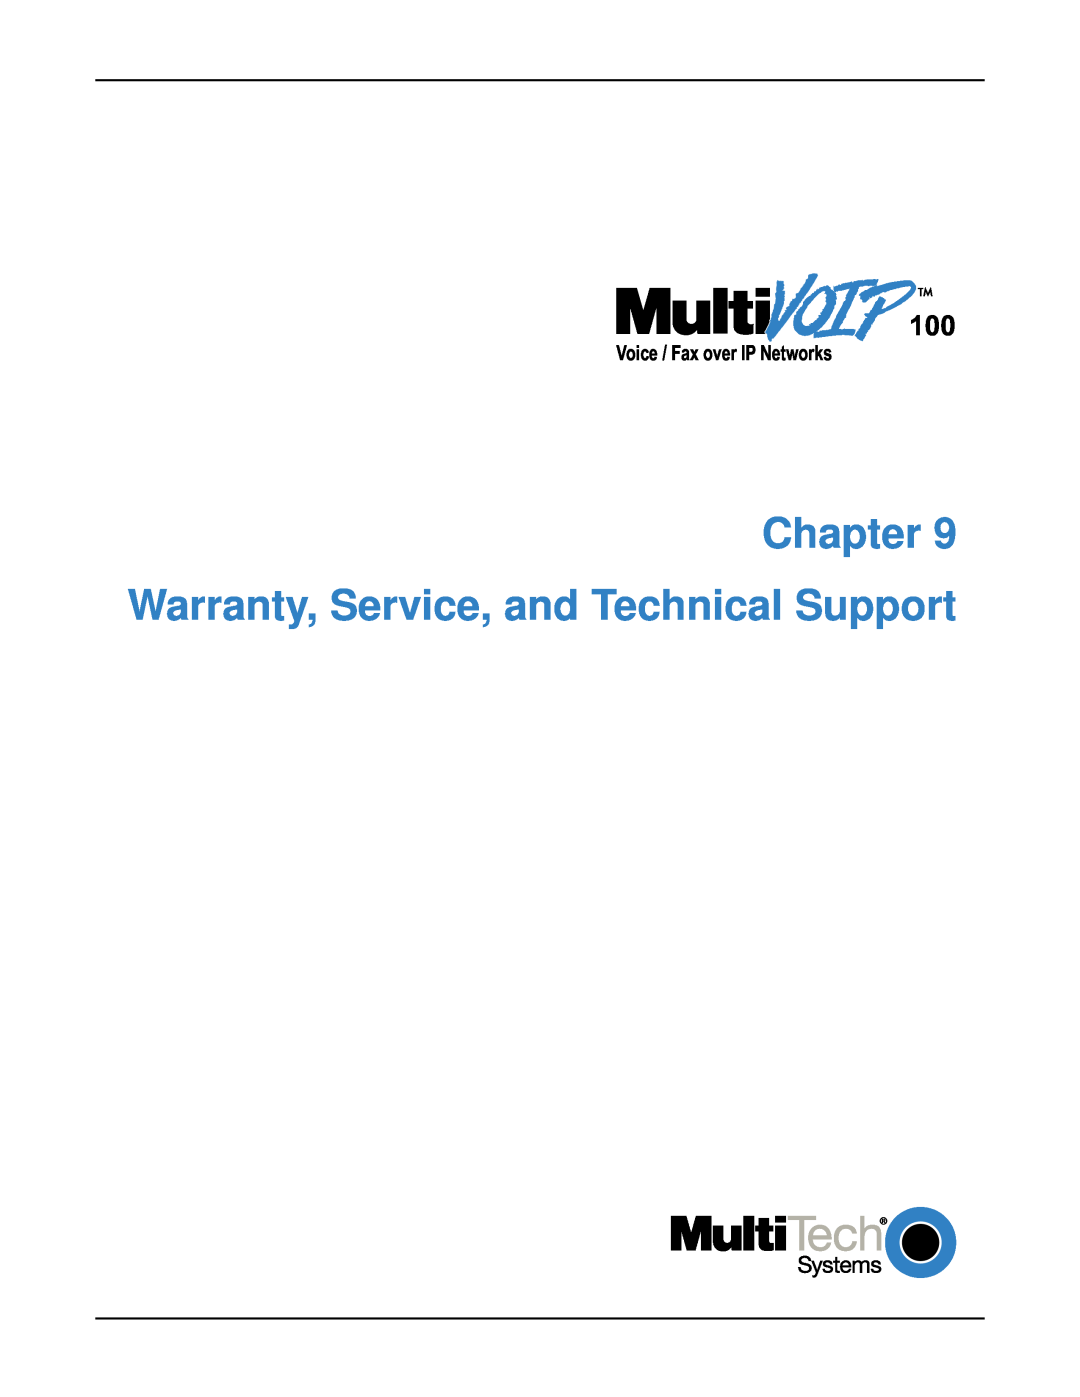 Multi-Tech Systems MVP120 manual Chapter Warranty, Service, and Technical Support, Voice / Fax over IP Networks 